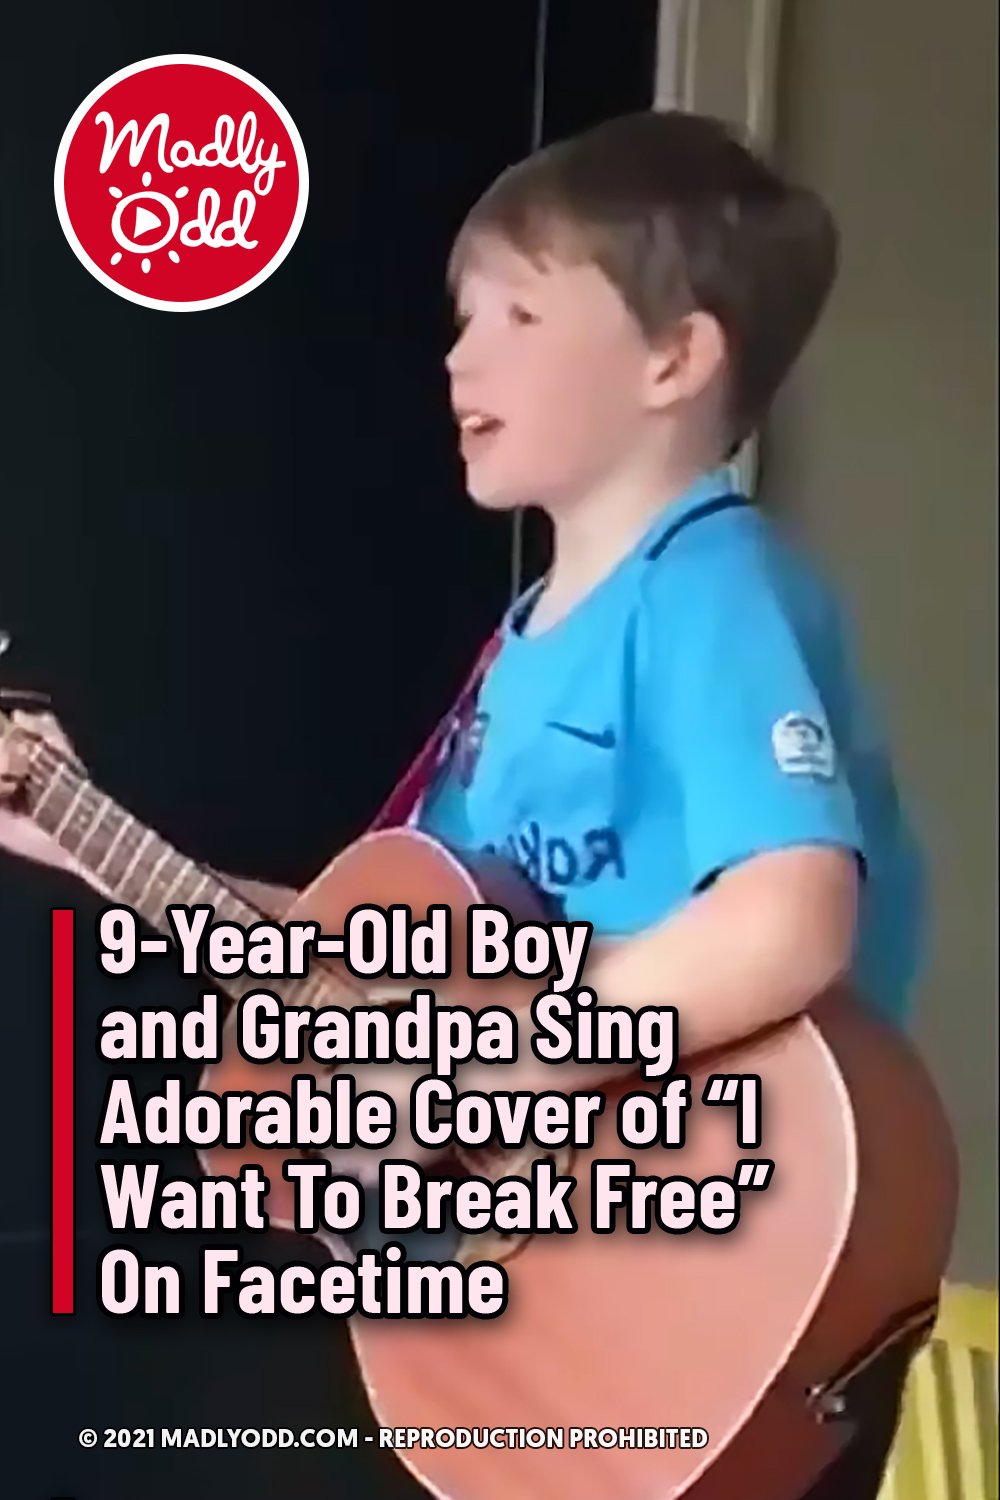 9-Year-Old Boy and Grandpa Sing Adorable Cover of “I Want To Break Free” On Facetime